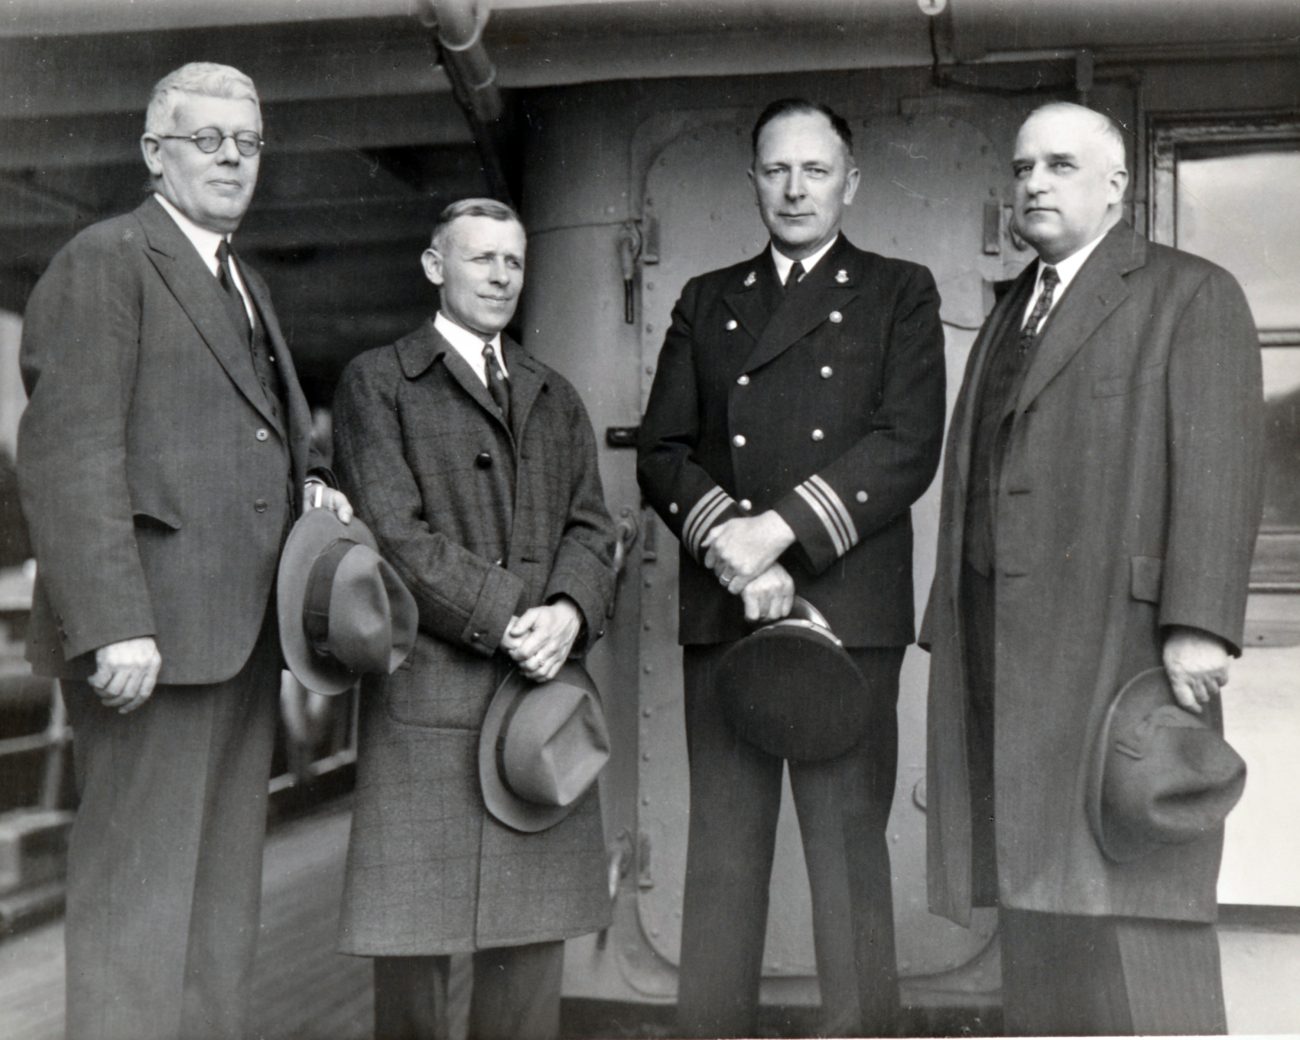 From L-R, Captain Hardy, unidentified, Lieutenant Commander Ray Schoppe,and Commander Sobieralski on the SURVEYOR attending launchingceremony of the USC&GS; Ship EXPLORER